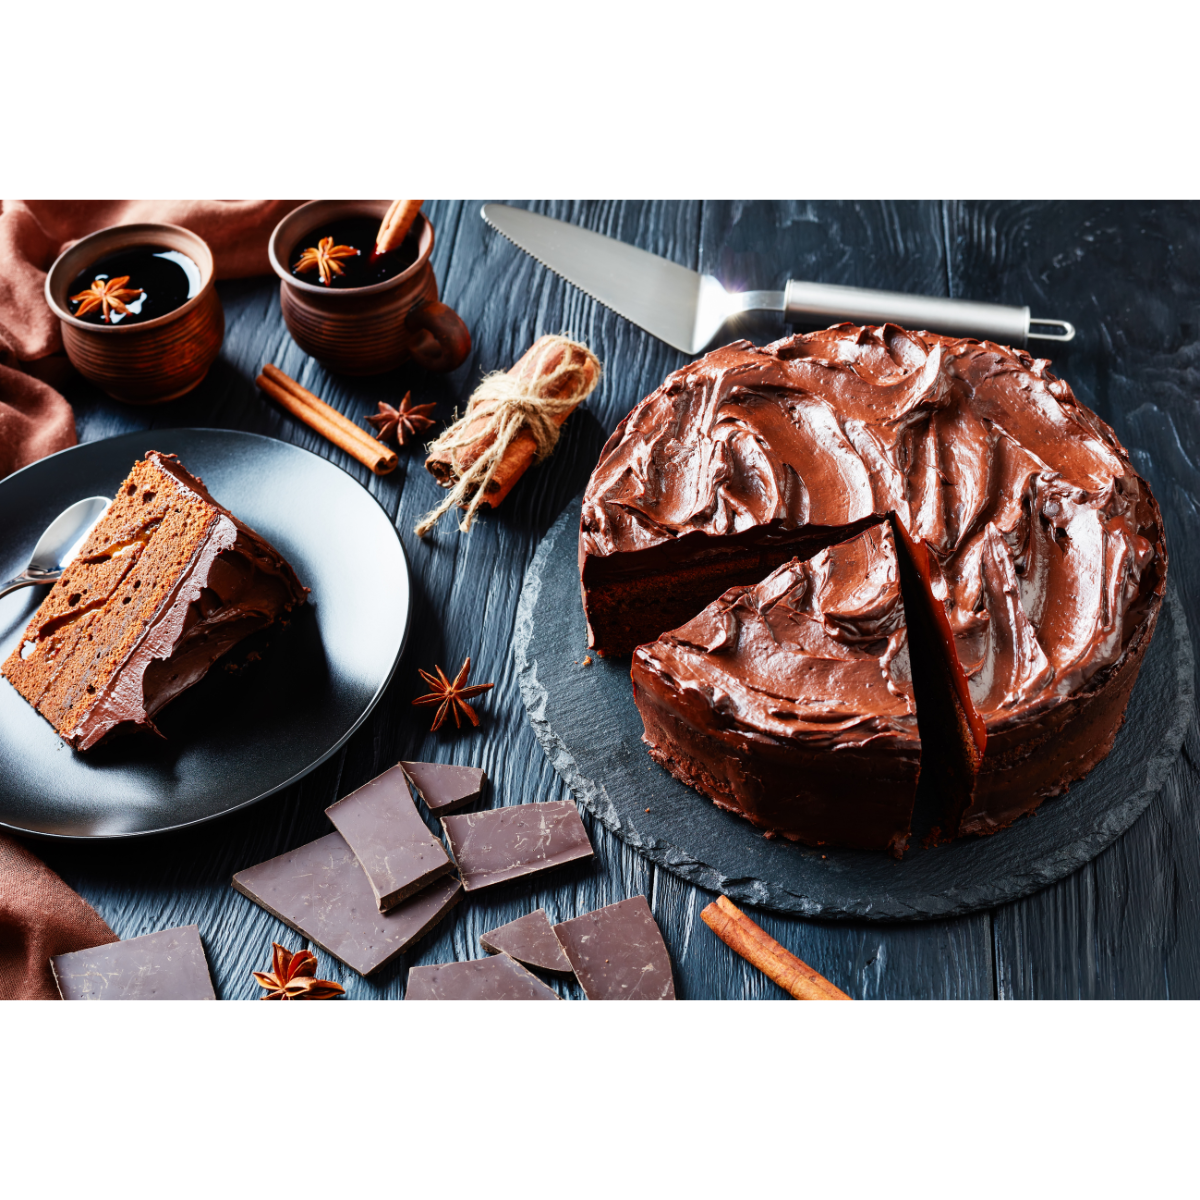 Professional chocolate cake with pieces of chocolate bars, spices, and a slice of cake on black plates and a black table.